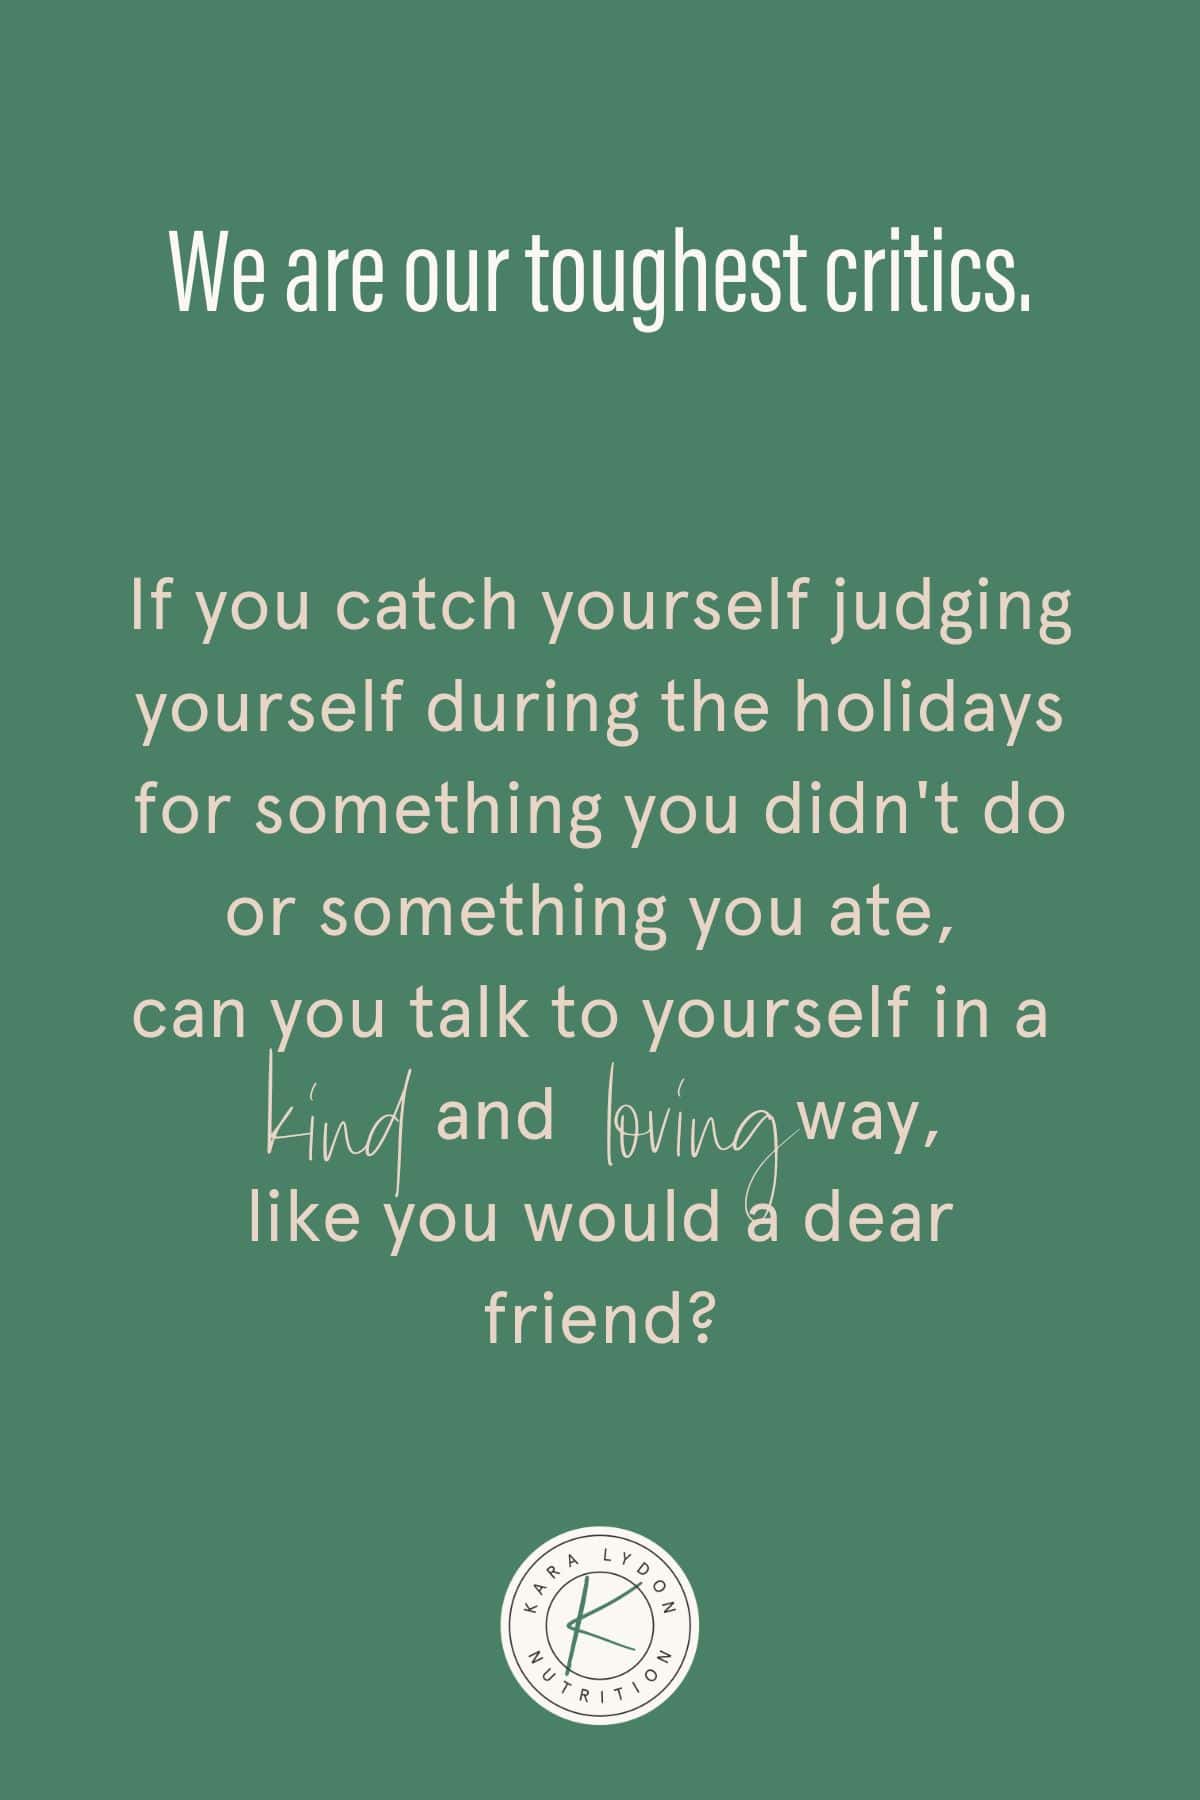 graphic with quote: "We are our toughest critics. If you catch yourself judging yourself during the holidays for something you didn't do or something you ate, can you talk to yourself in a kind and loving way, like you would a dear friend?"